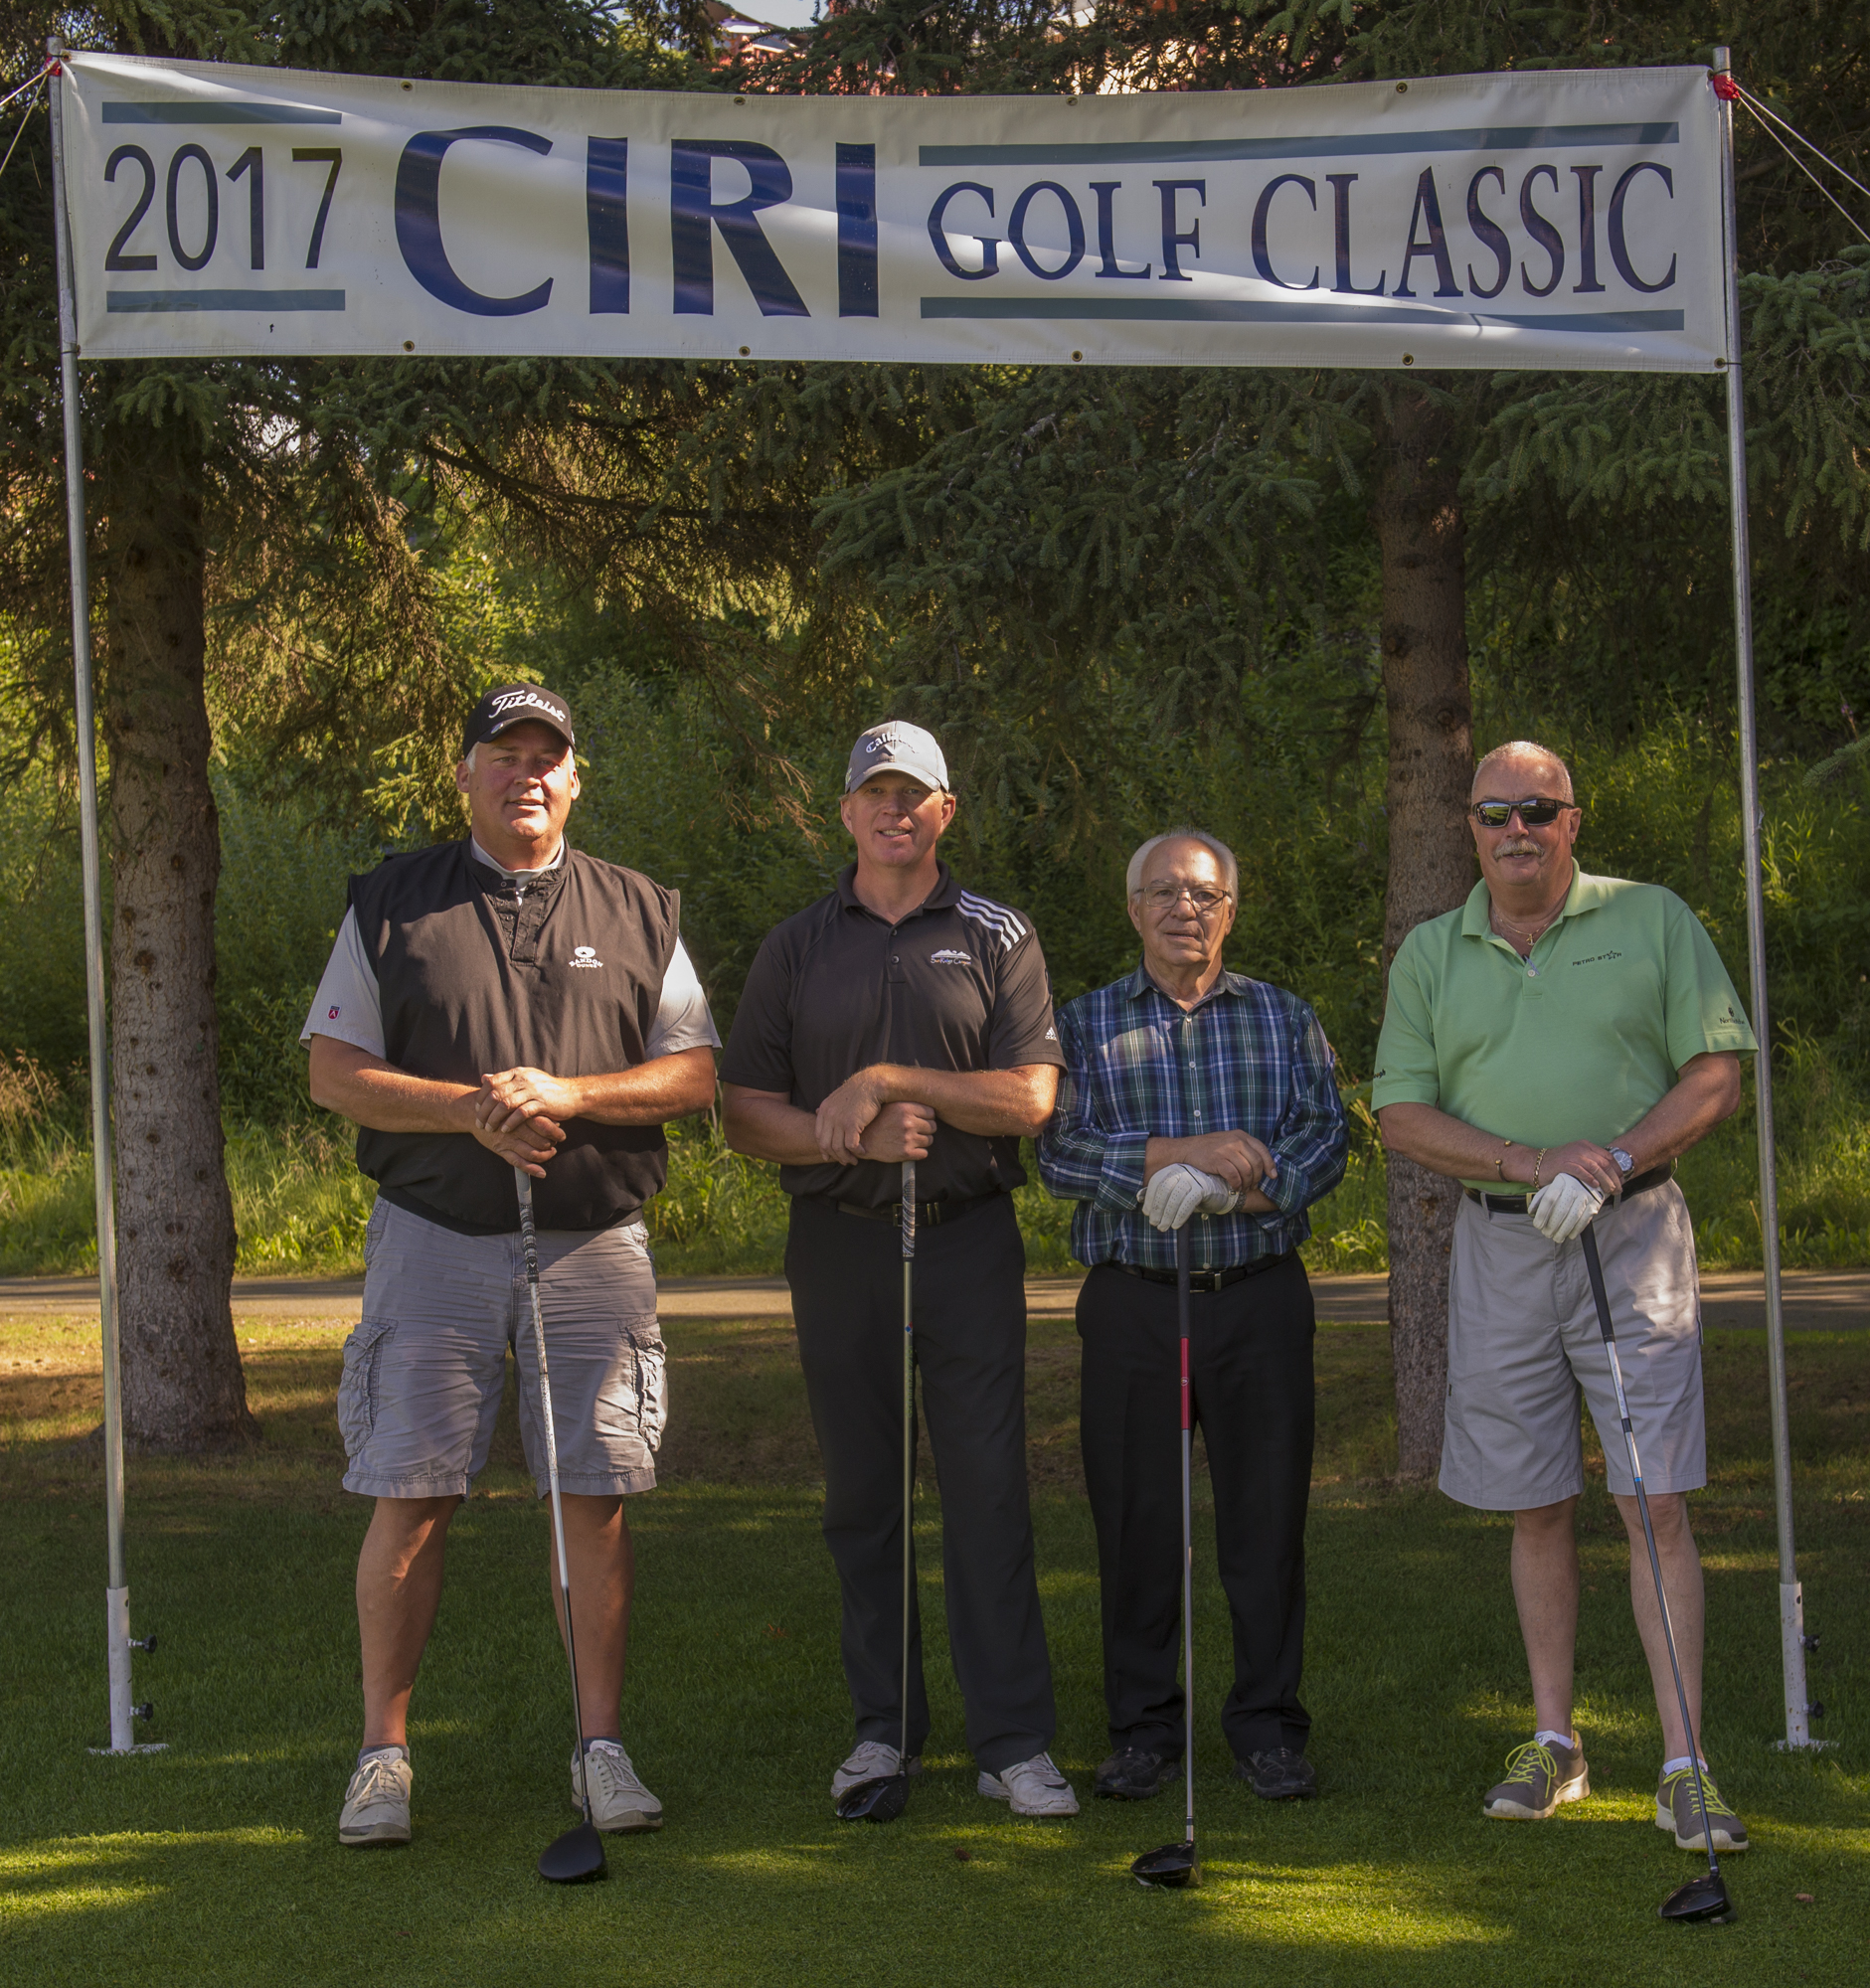 The team from Petro Star Inc. took first place. L to R: Gene Carlson, Chad Meyhoff, Don Norvell and Don Castle. Photo by Joel Irwin